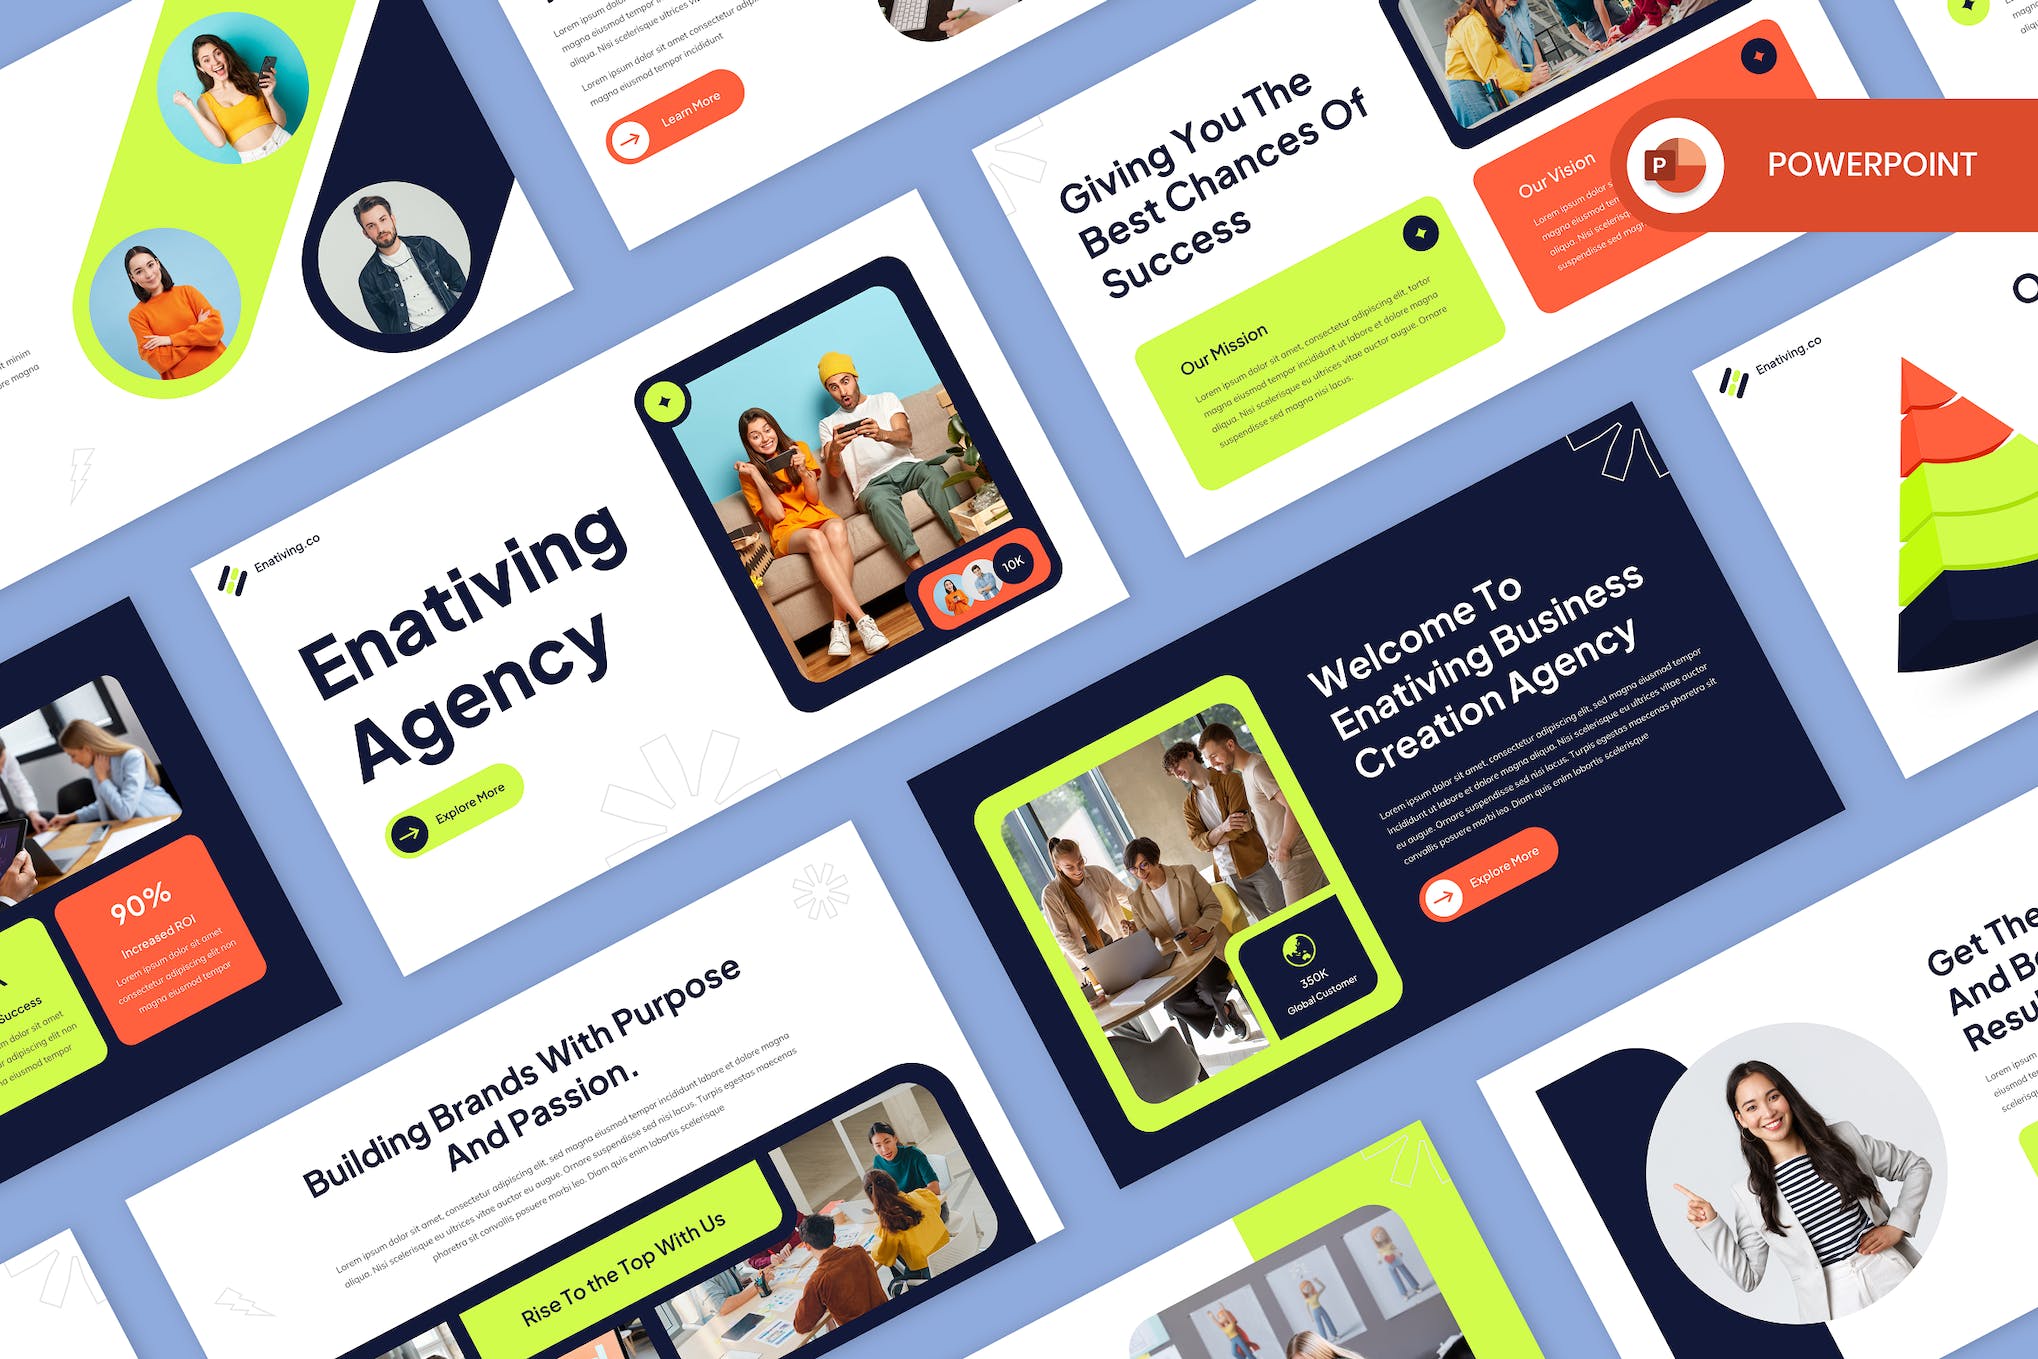 Enativing - Creative Agency PowerPoint Template